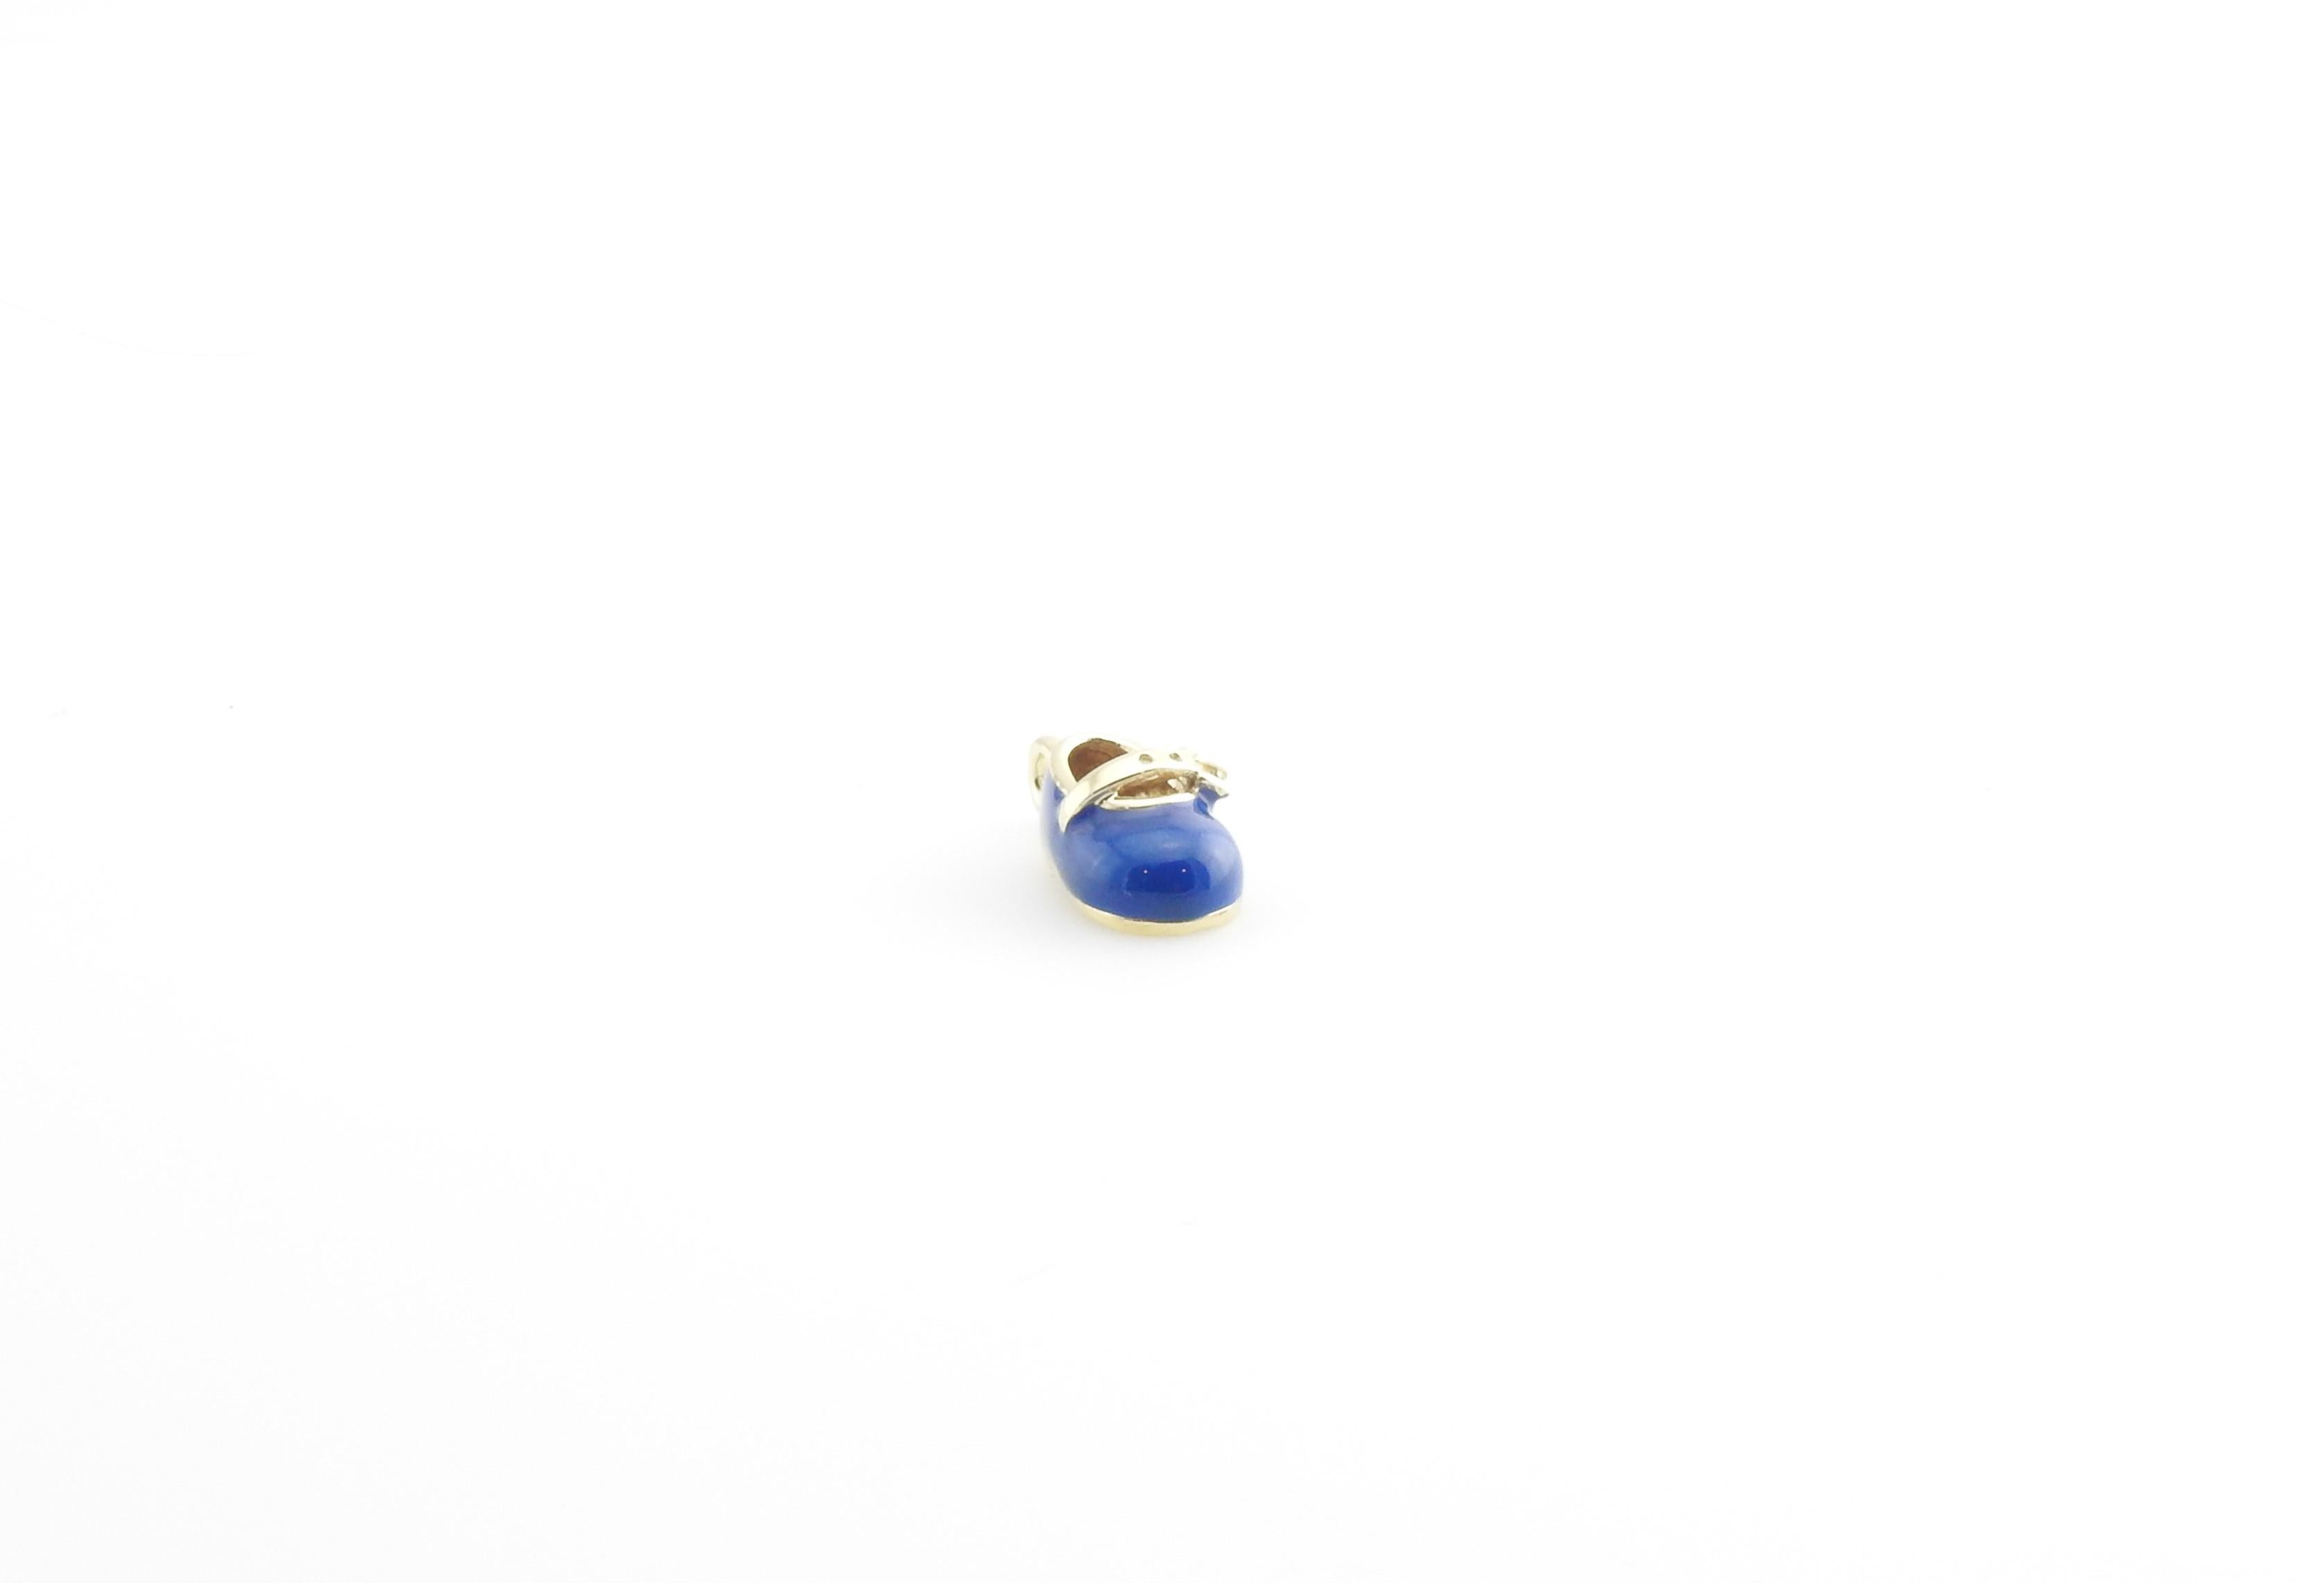 Vintage 10 Karat Yellow Gold and Enamel Baby Shoe Charm

Celebrate baby's first steps!

This lovely 3D charm features a miniature baby shoe accented with blue enamel and crafted in beautifully detailed 10K yellow gold.

Size: 13 mm x 7 mm actual